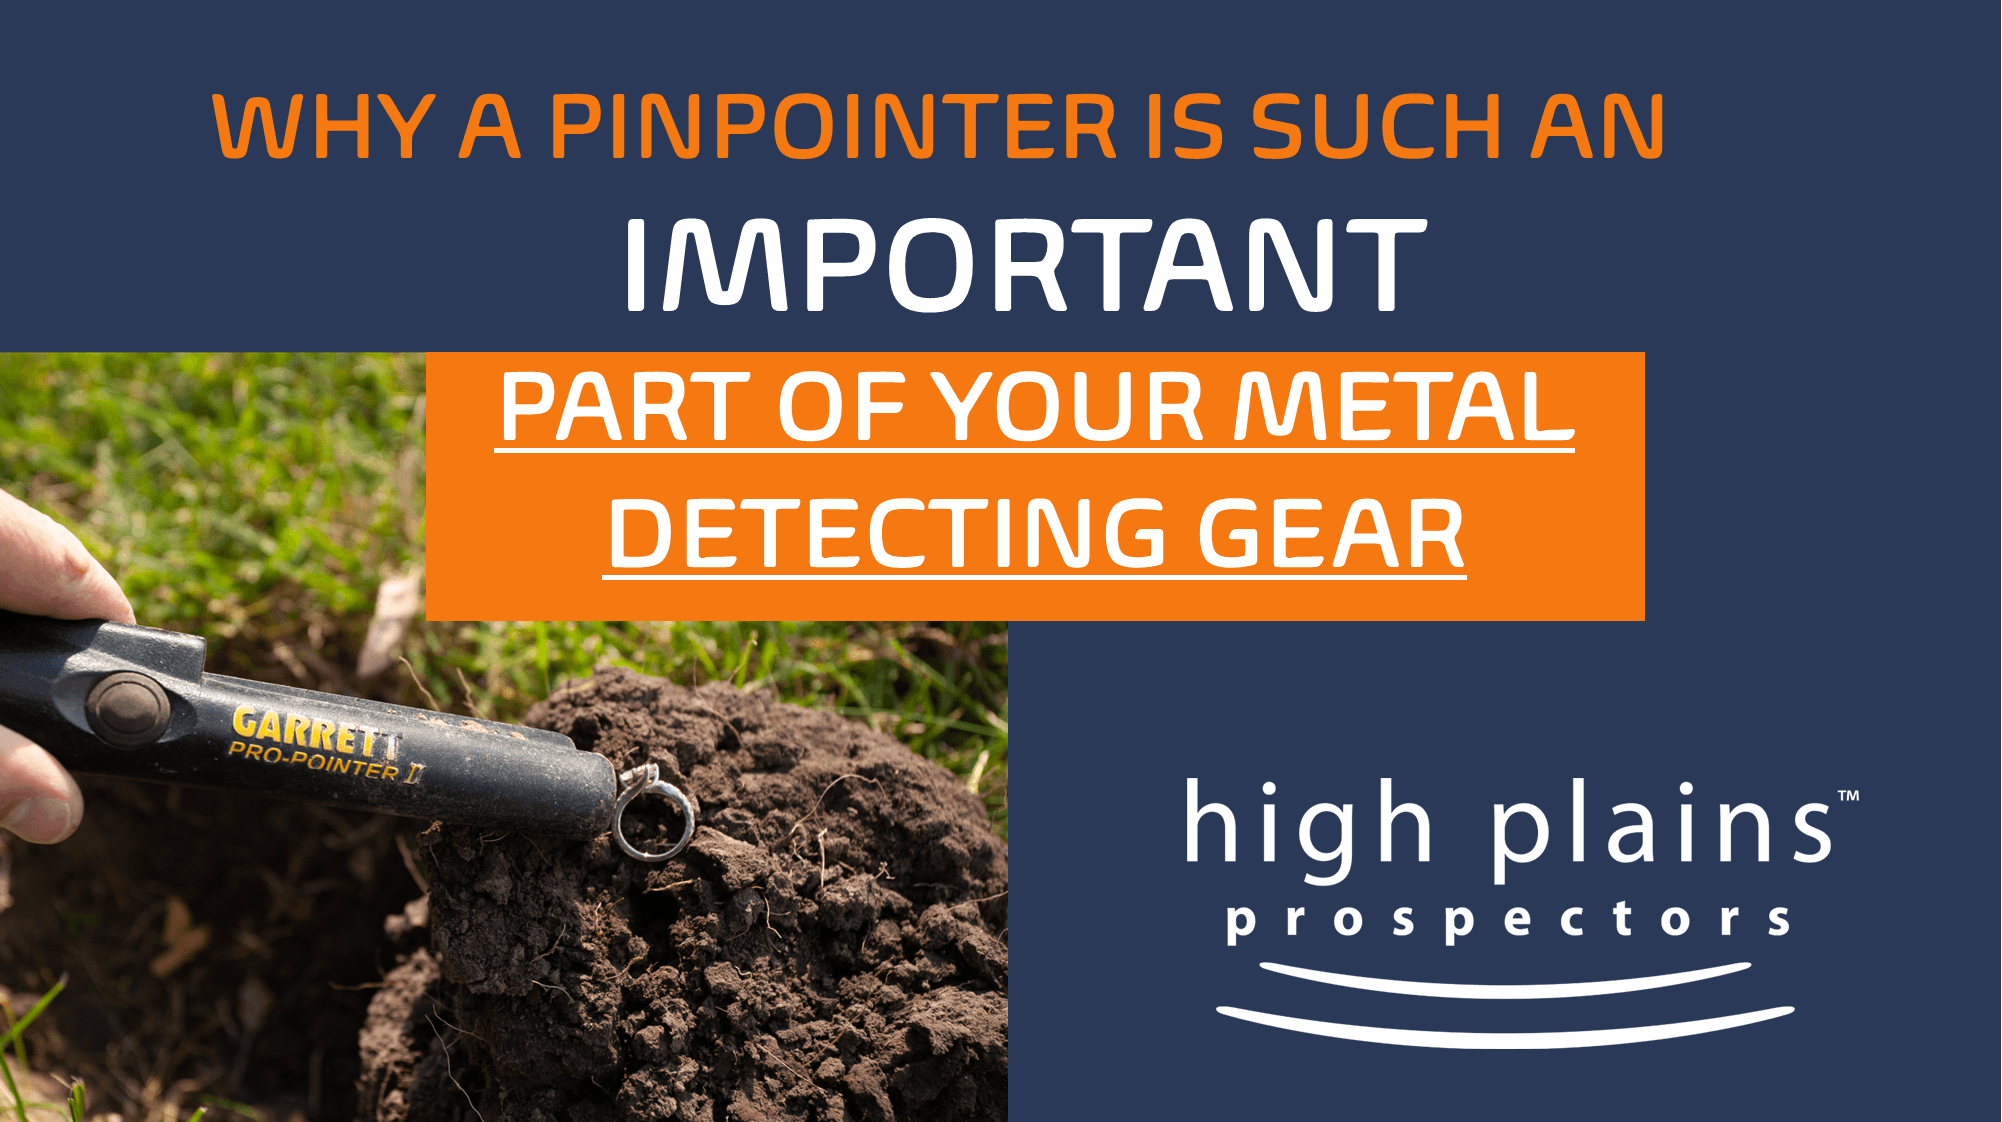 Why a Pinpointer is Such a Crucial Part of Your Metal Detecting Gear